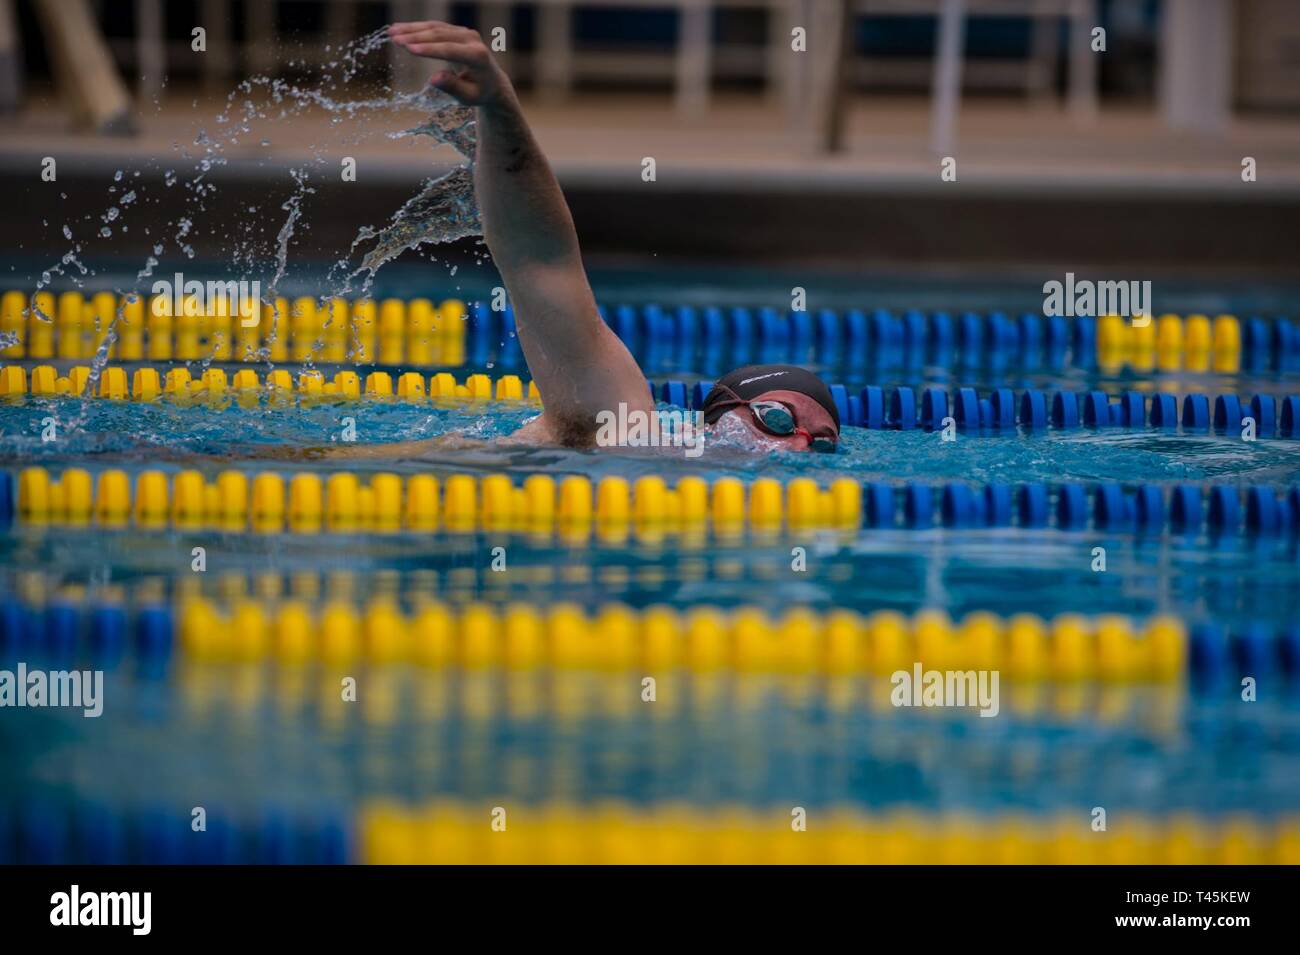 A U.S. Marine Corps athlete practices swimming during the 2019 Marine Corps Trials at Marine Corps Base Camp Pendleton, California, March 1. The Marine Corps Trials promotes recovery and rehabilitation through adaptive sports participation and develops camaraderie among recovering service members and veterans. Additionally, the competition is an opportunity for participants to demonstrate physical and mental achievements and serves as the primary venue to select Marine Corps participants for the DoD Warrior Games. Stock Photo